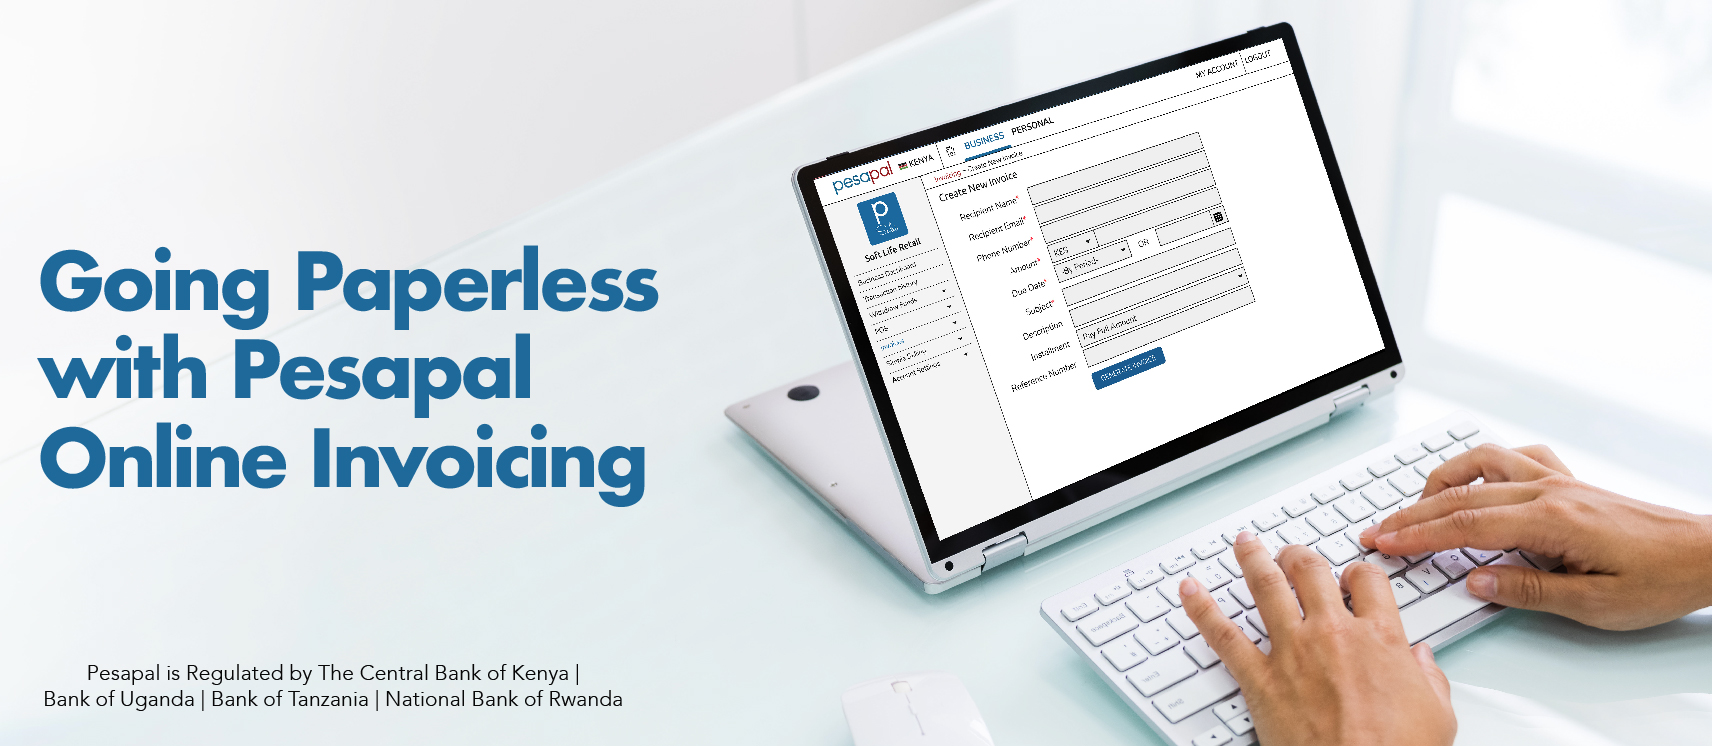 Going Paperless with Pesapal Online Invoicing